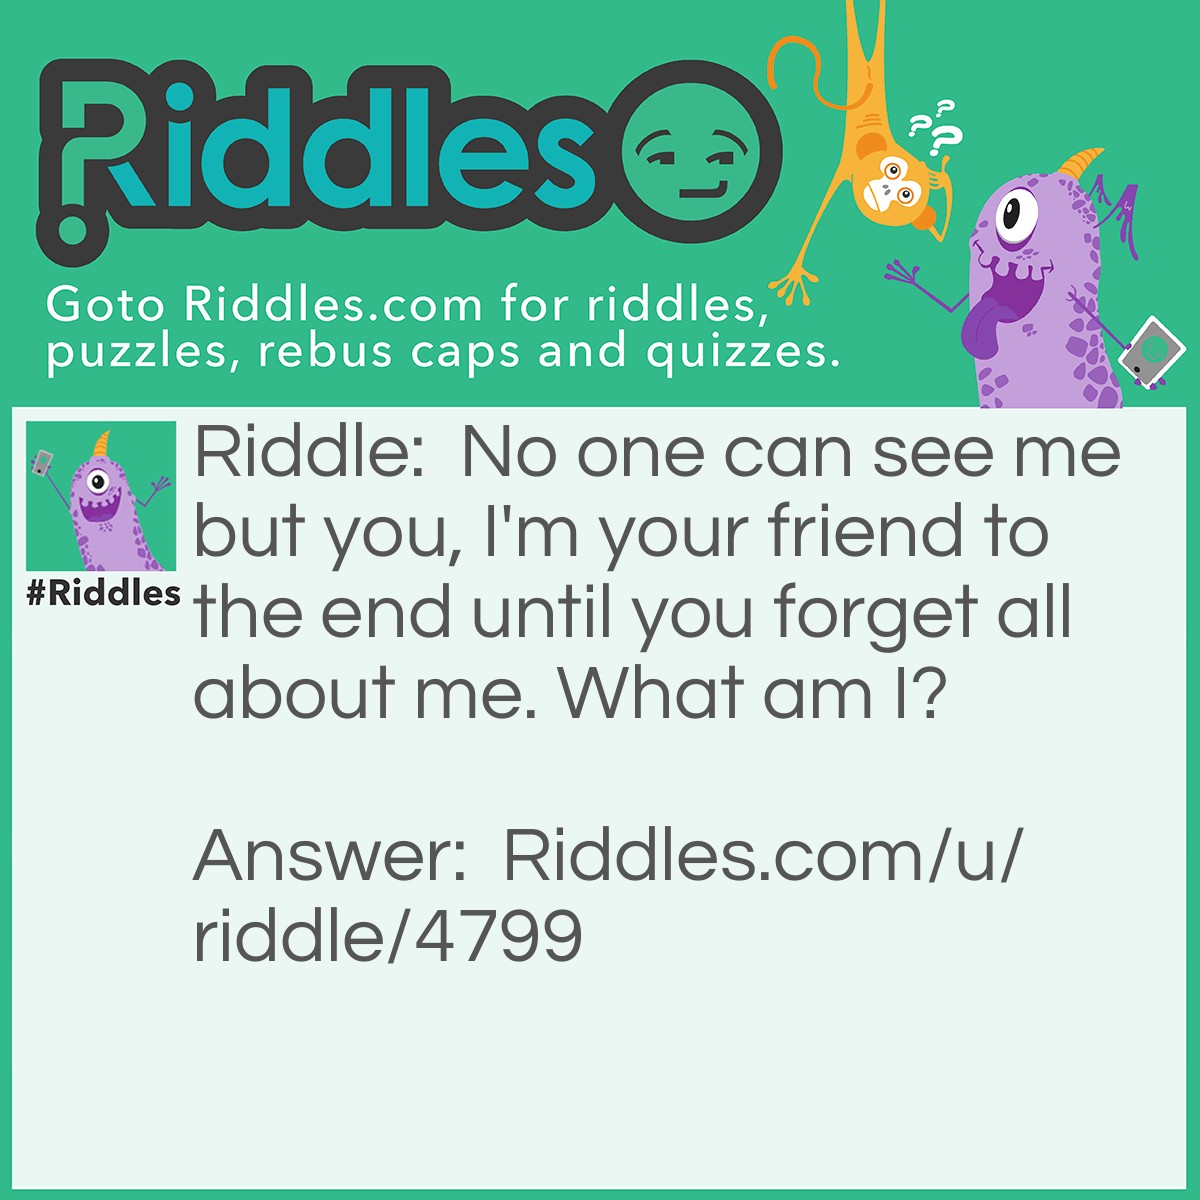 Riddle: No one can see me but you, I'm your friend to the end until you forget all about me. What am I? Answer: Imaginary friend.